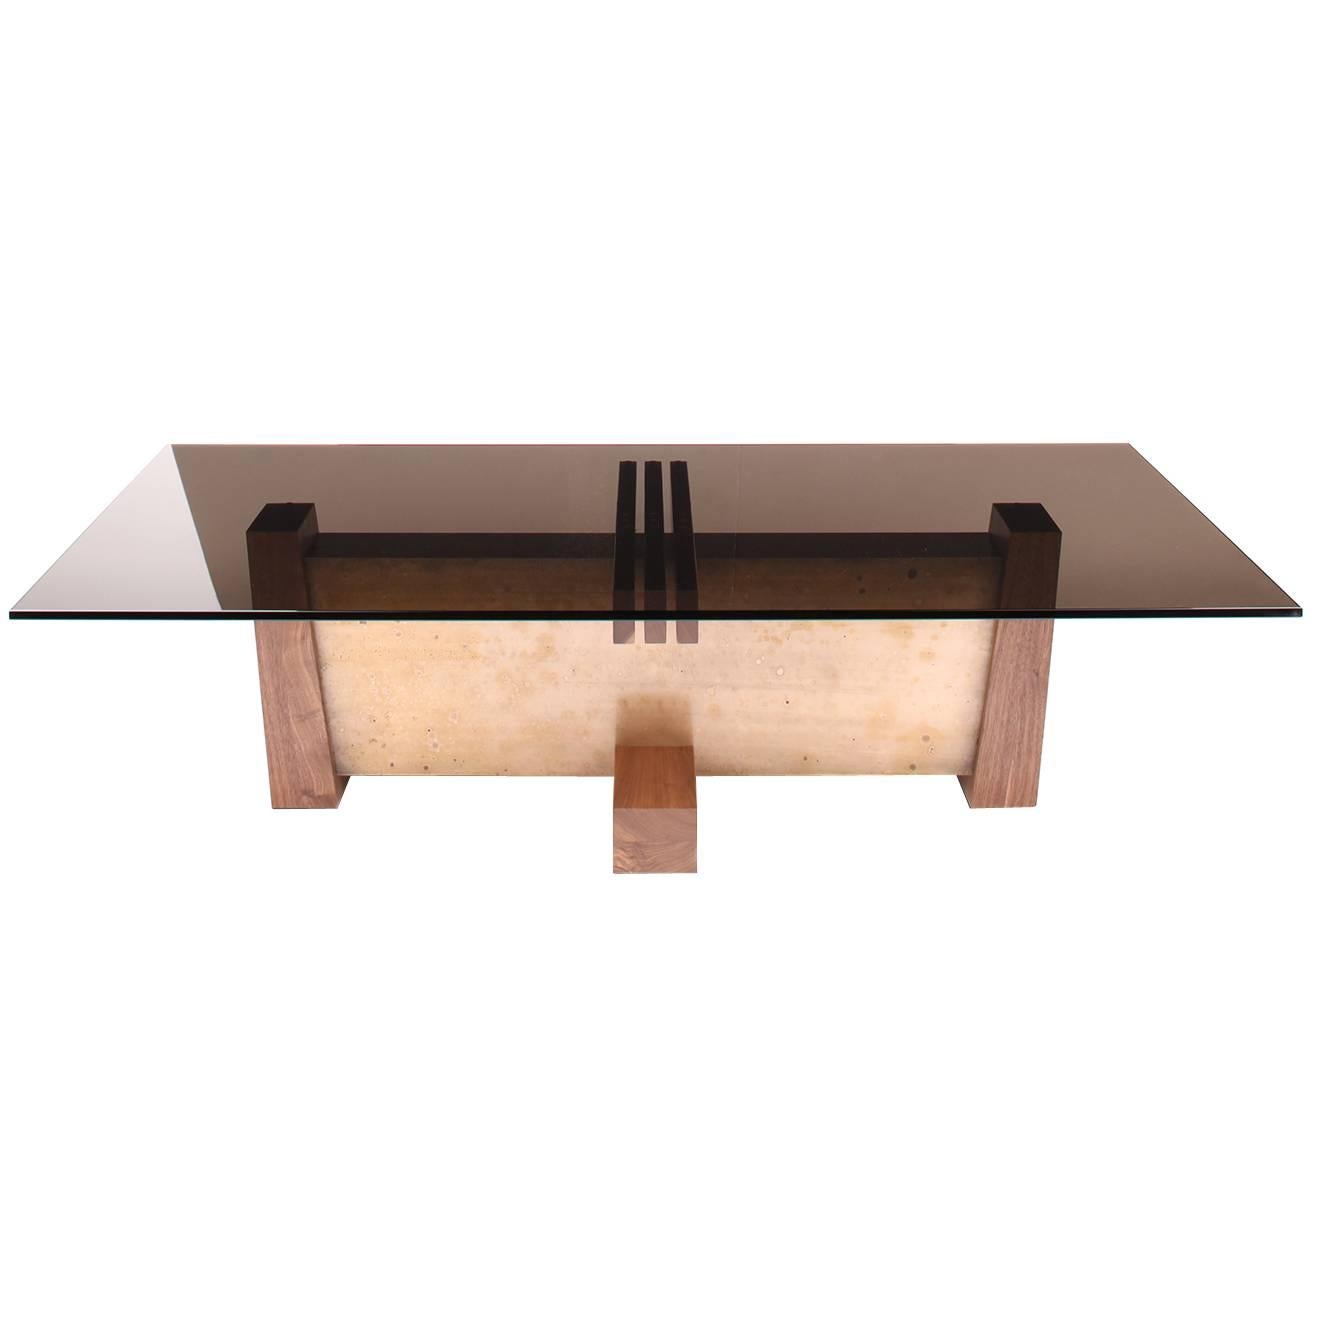 FLW Cocktail Table in Etched Bronze, Walnut and Smoked Glass by Studio Roeper